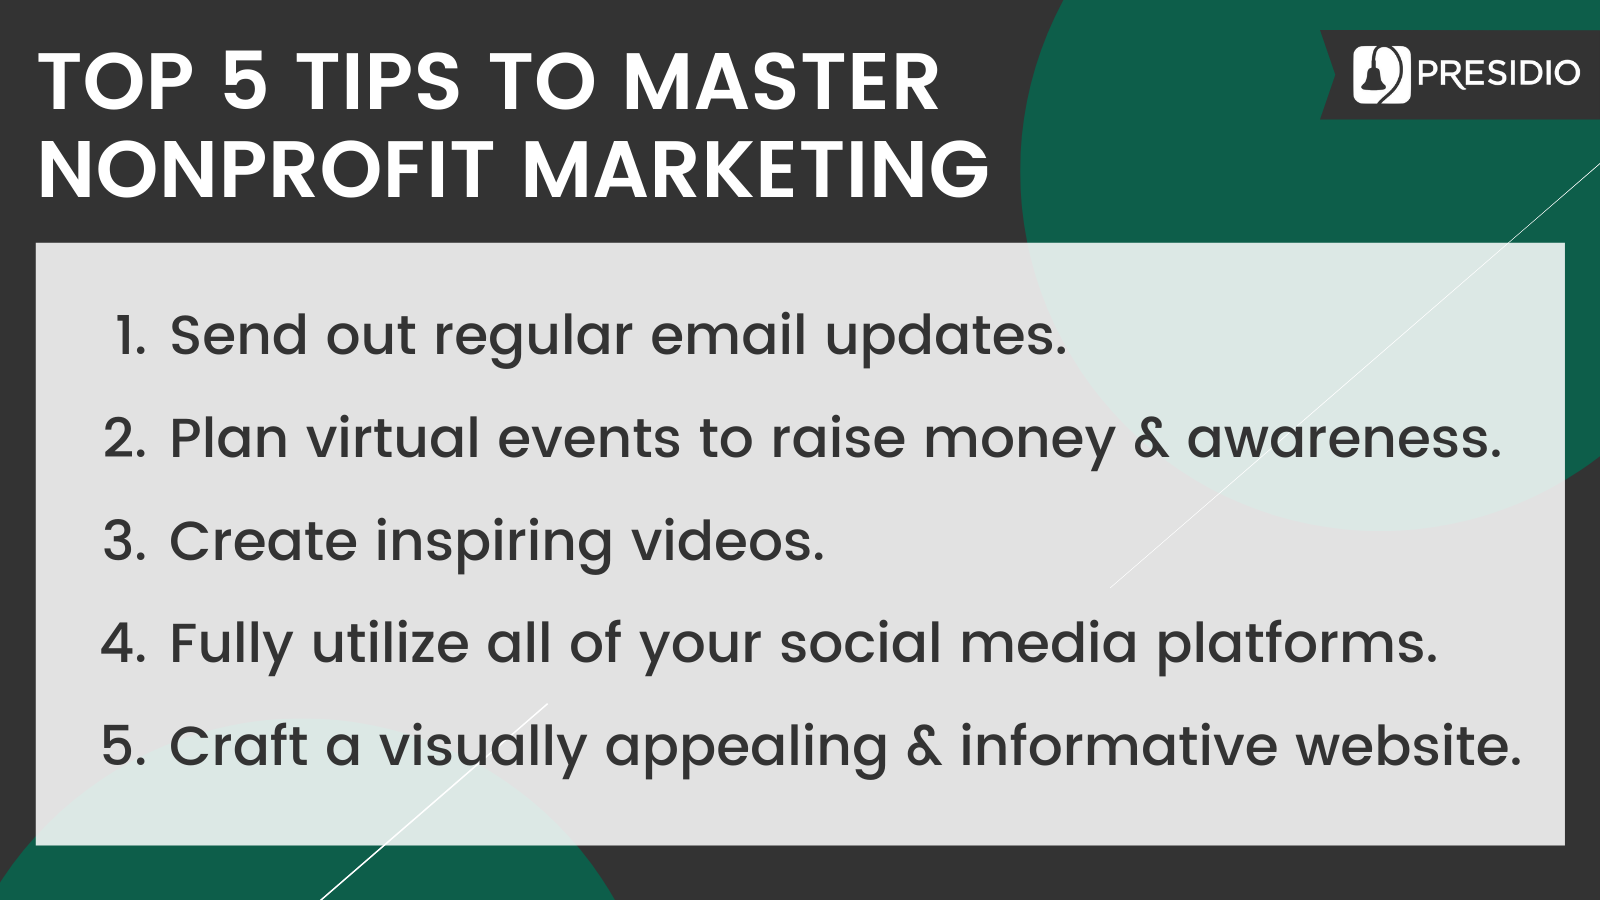 Top 5 Tips for Mastering Nonprofit Marketing